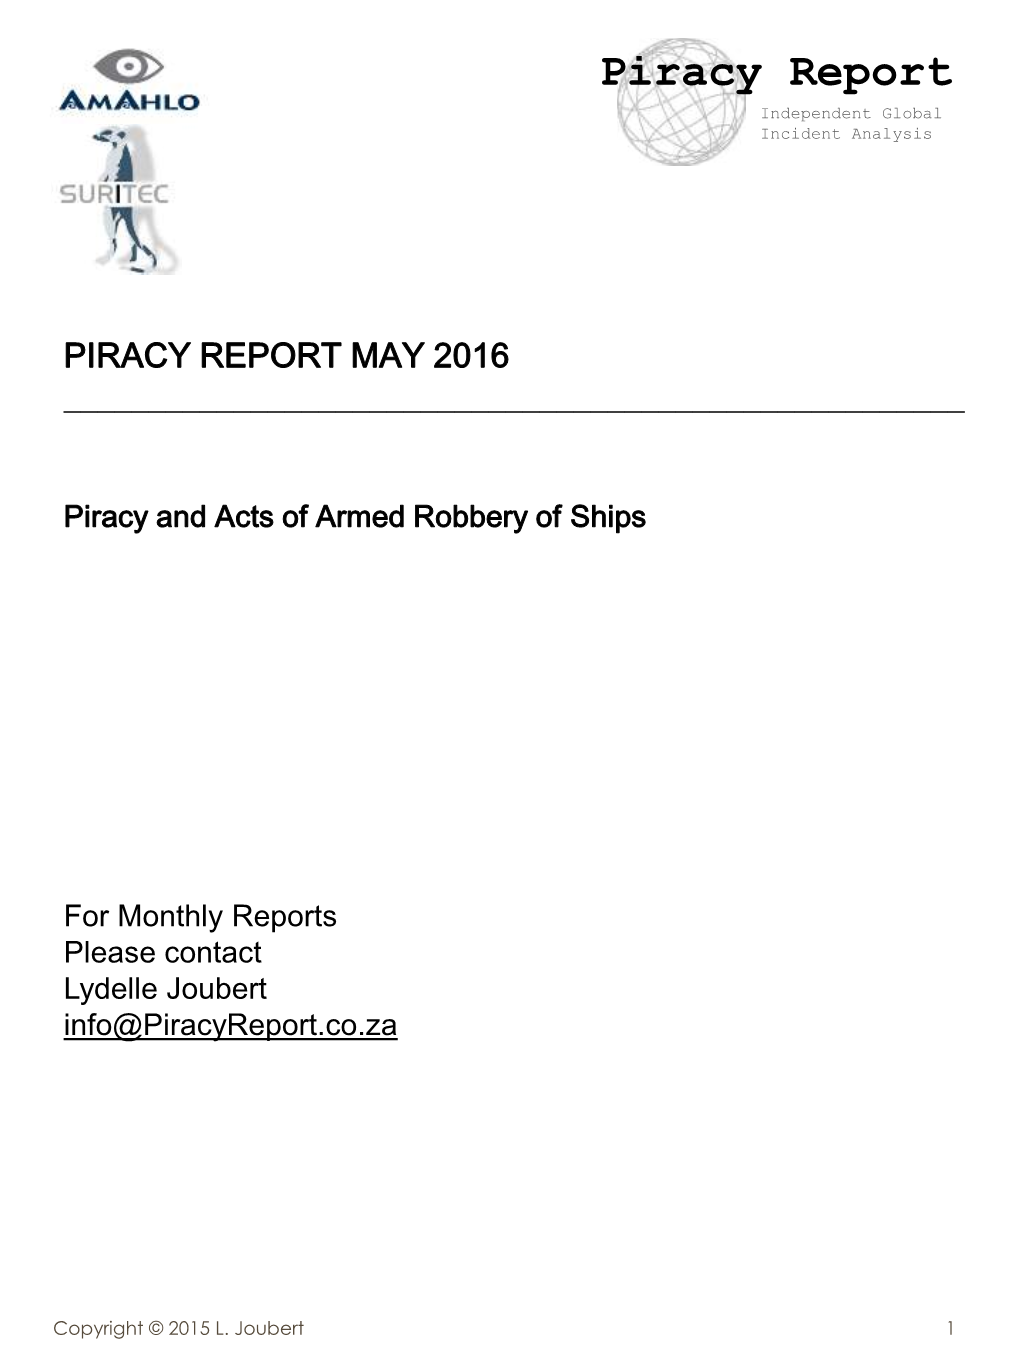 Piracy Report Independent Global Incident Analysis